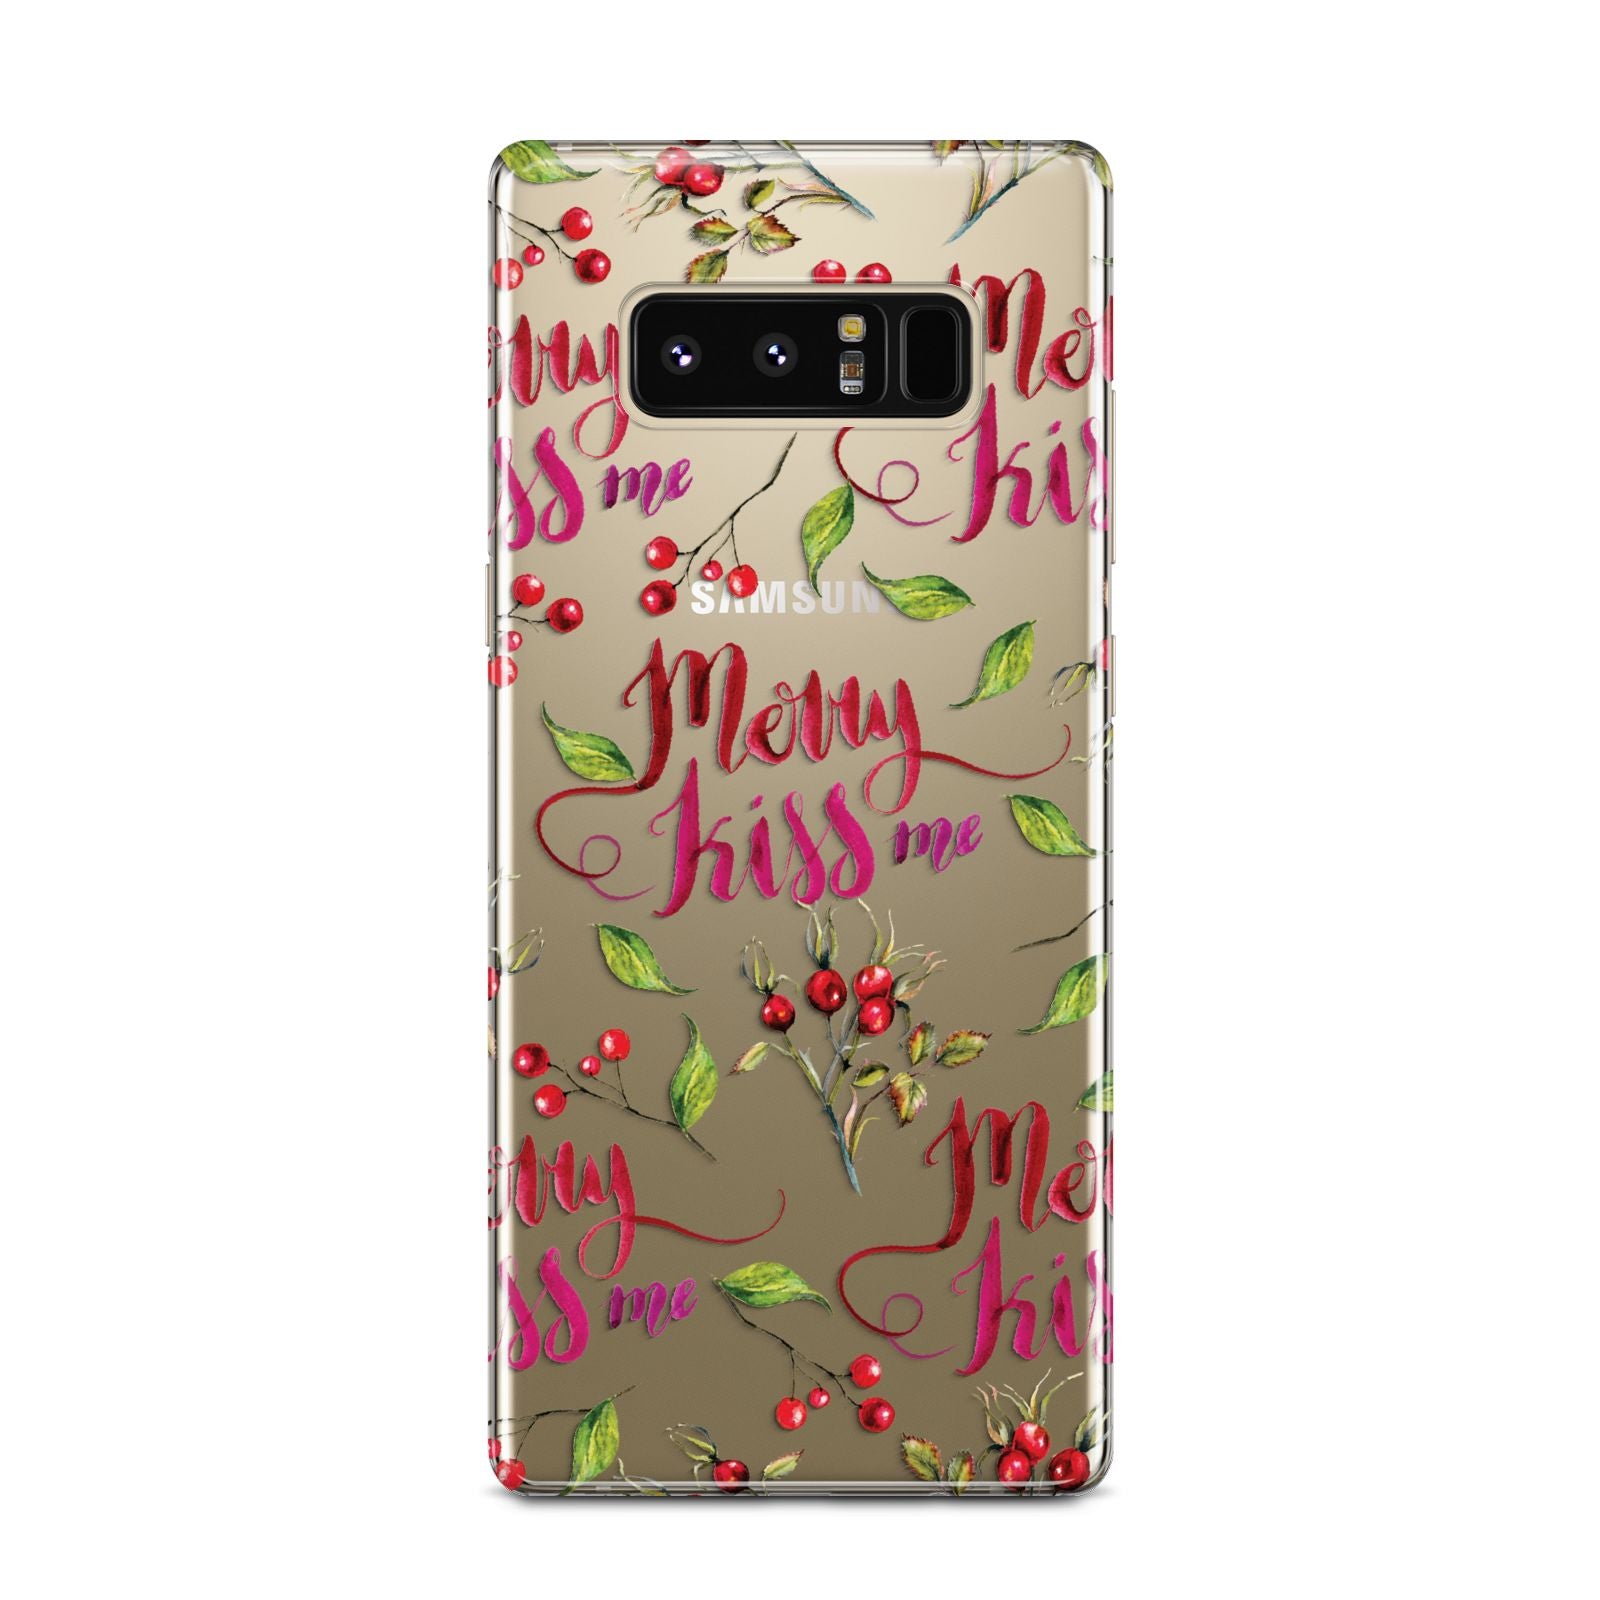 Merry kiss me Samsung Galaxy Note 8 Case